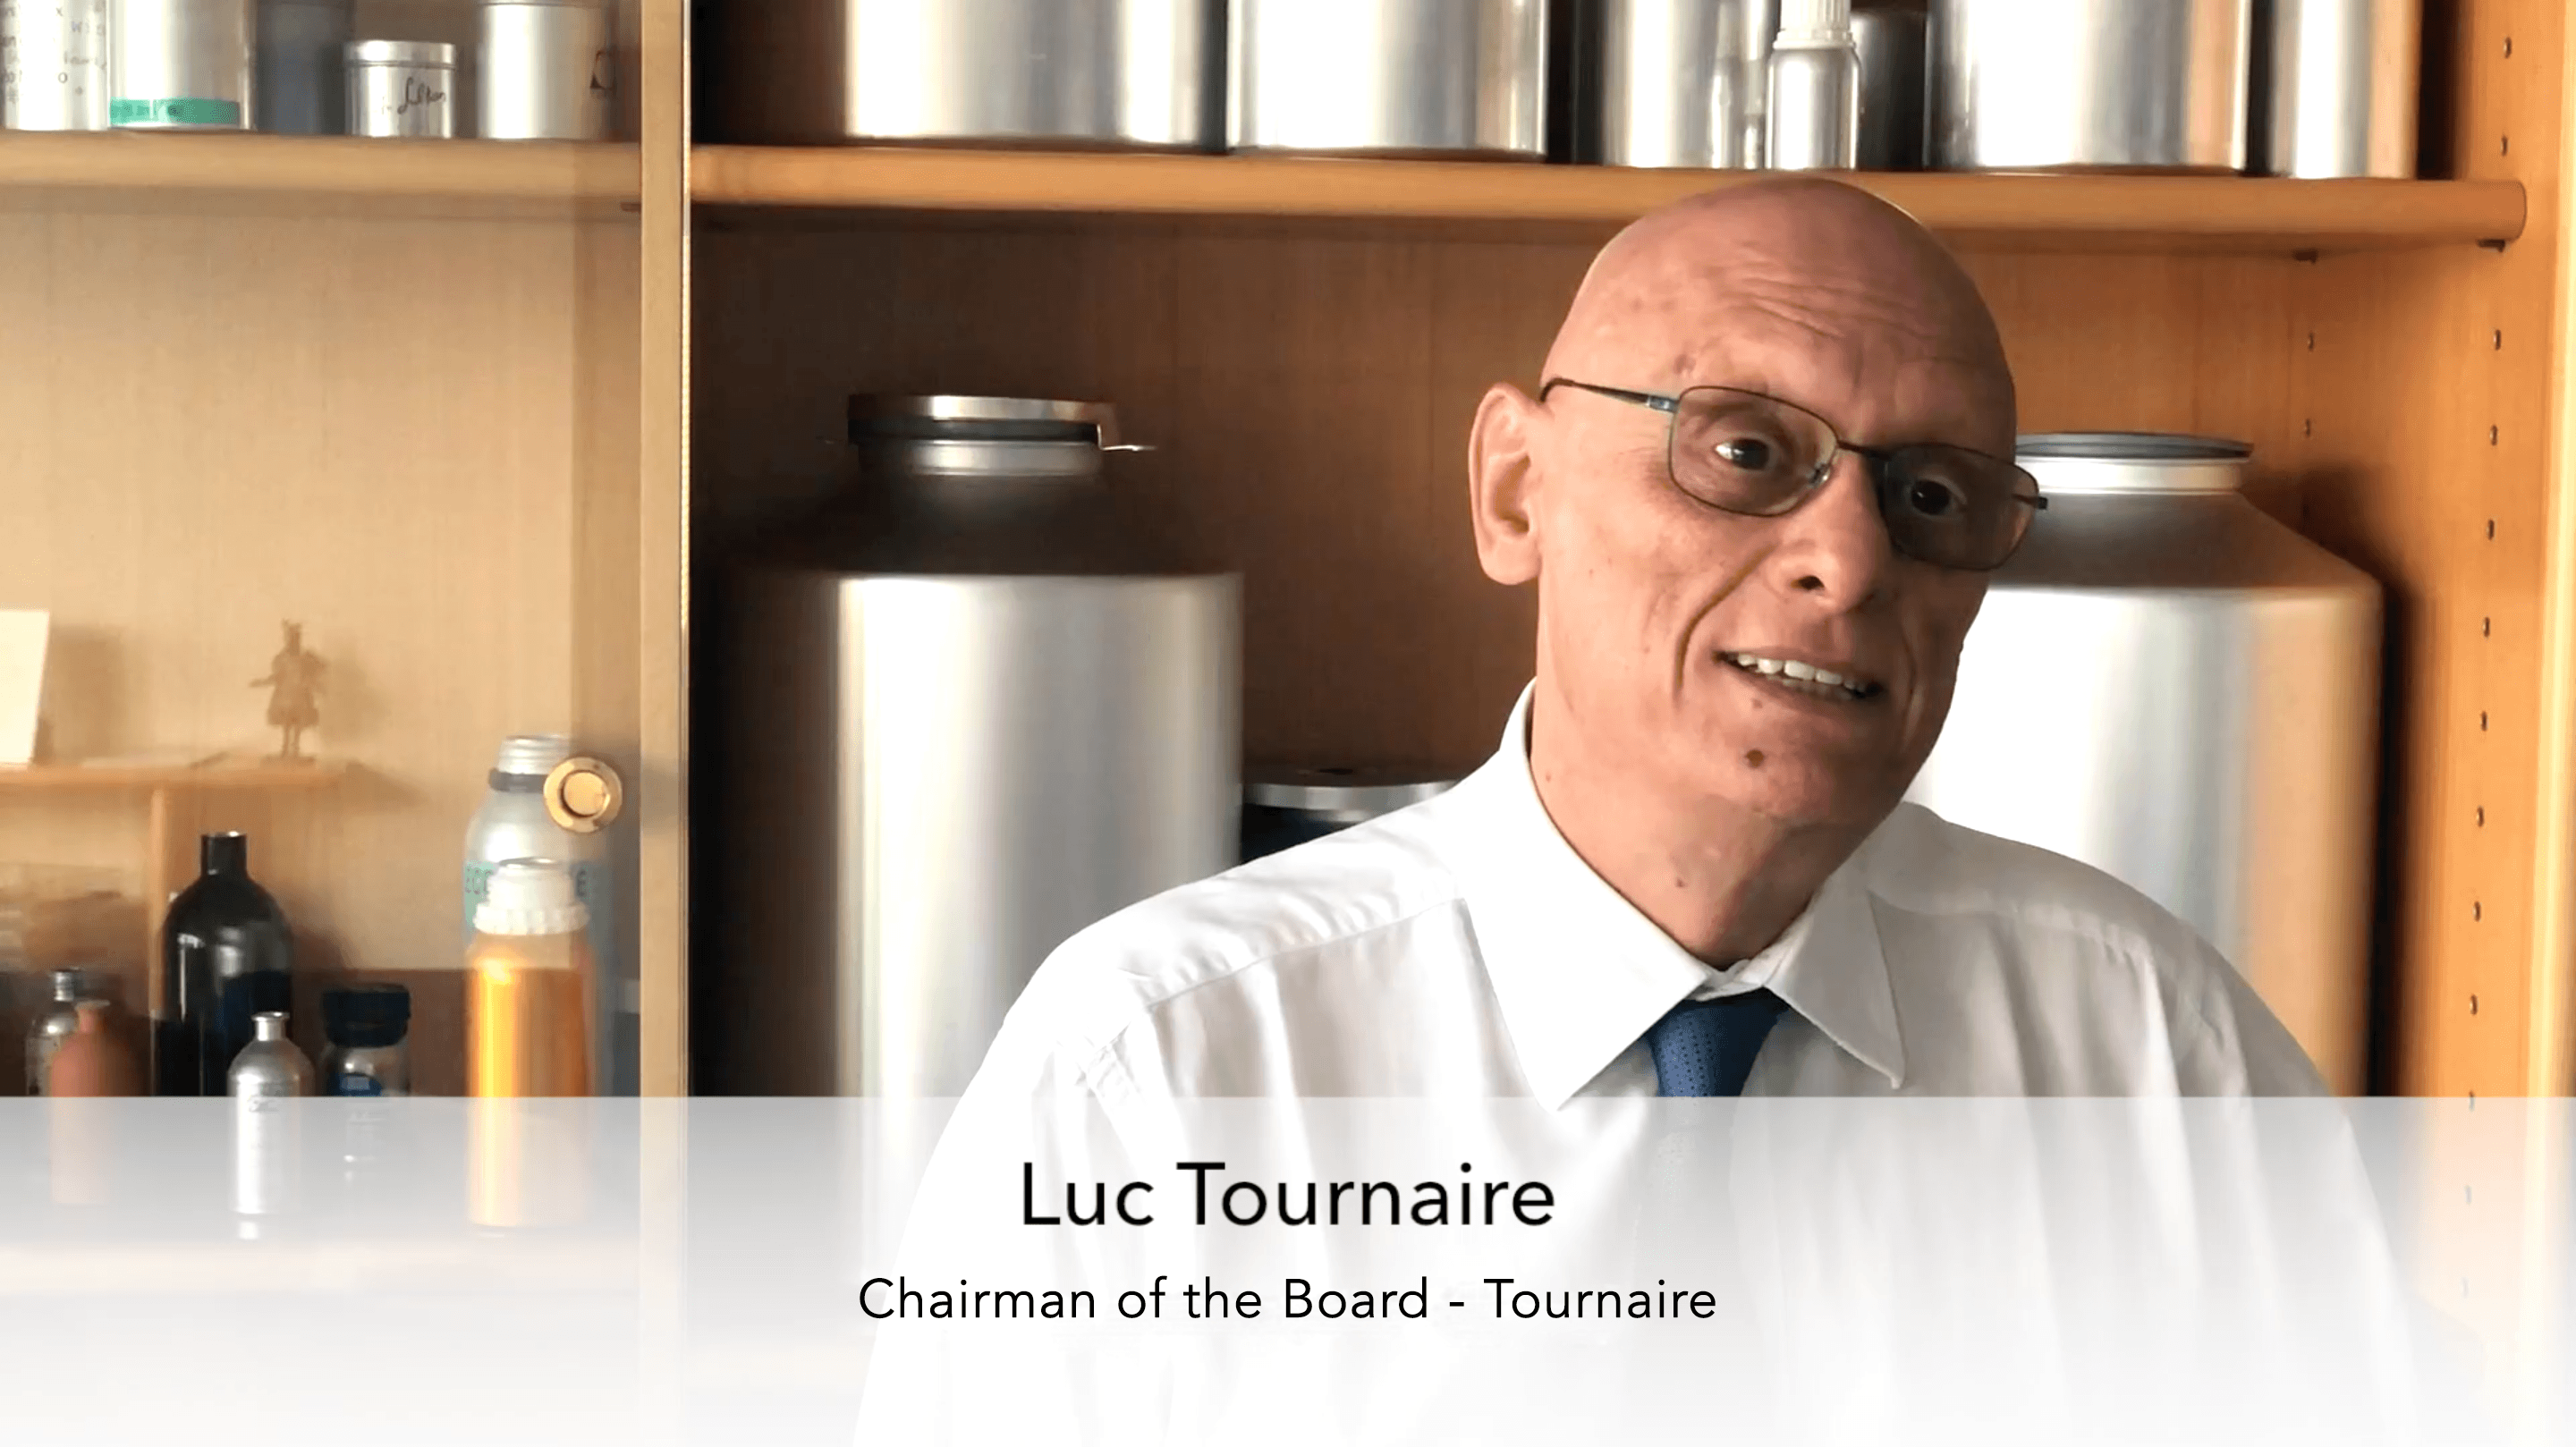 TOURNAIRE MOVES INTO THE ASIA PACIFIC REGION